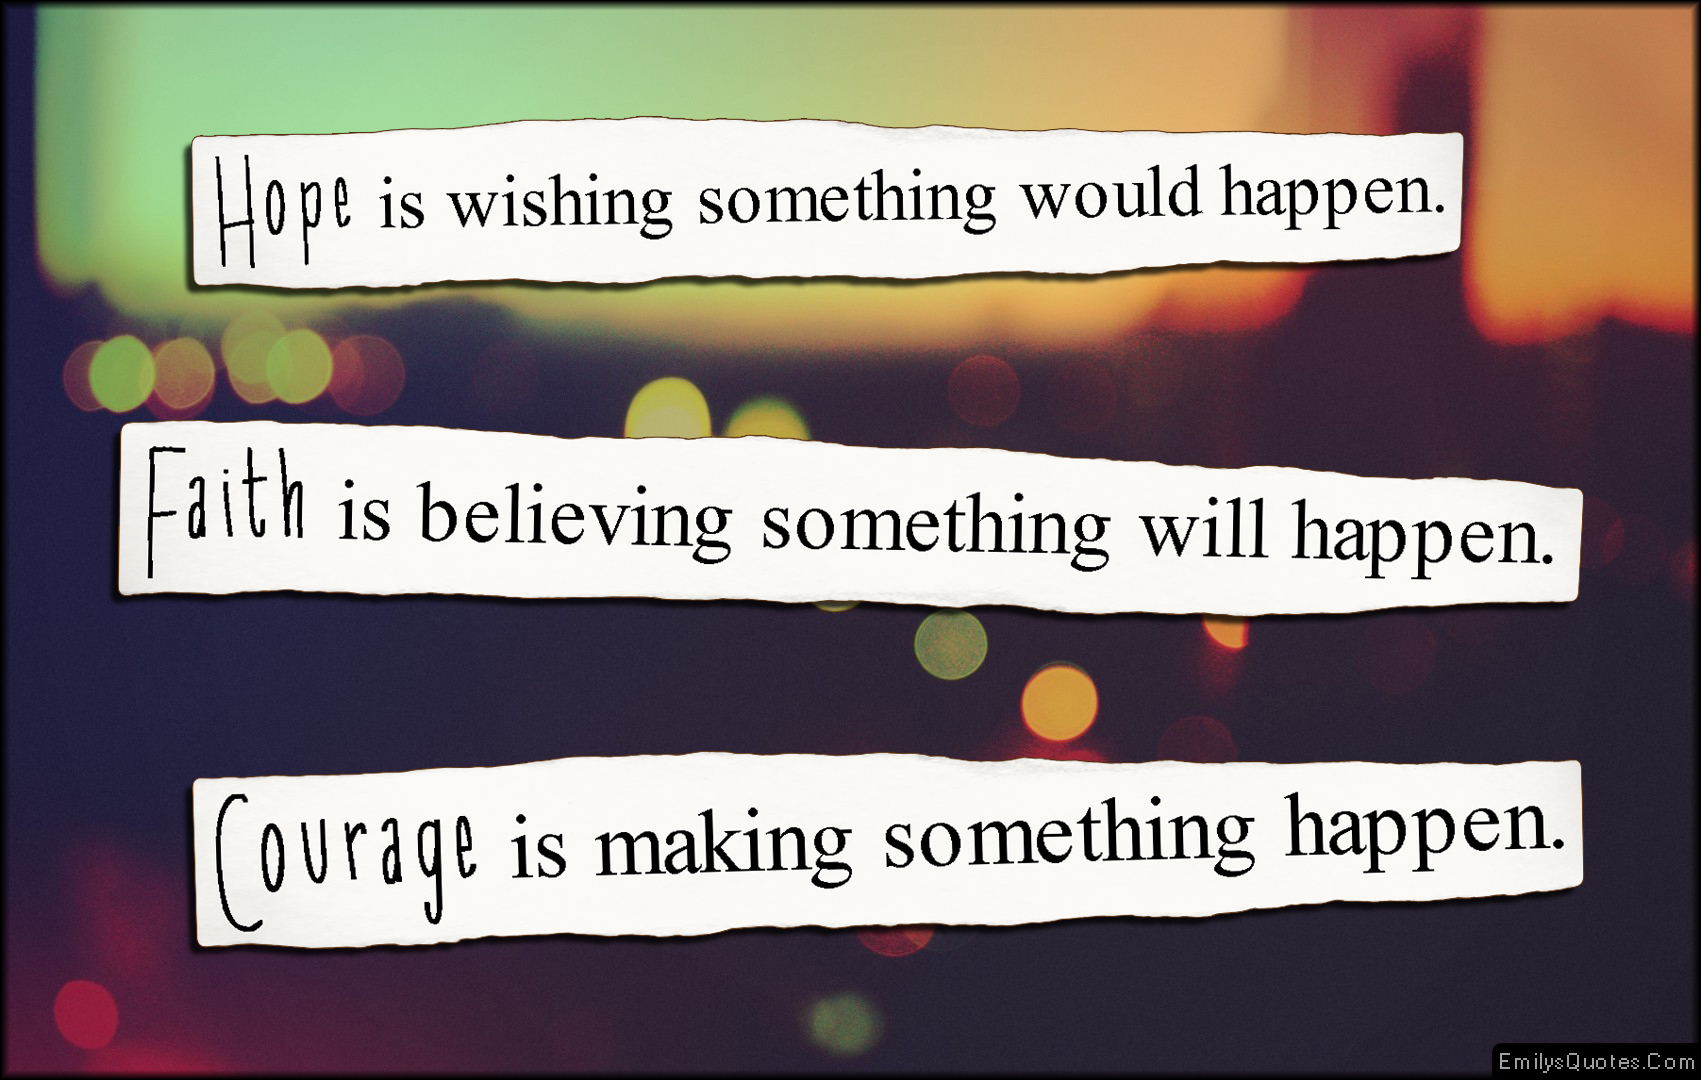 Hope is wishing something would happen. Faith is believing something